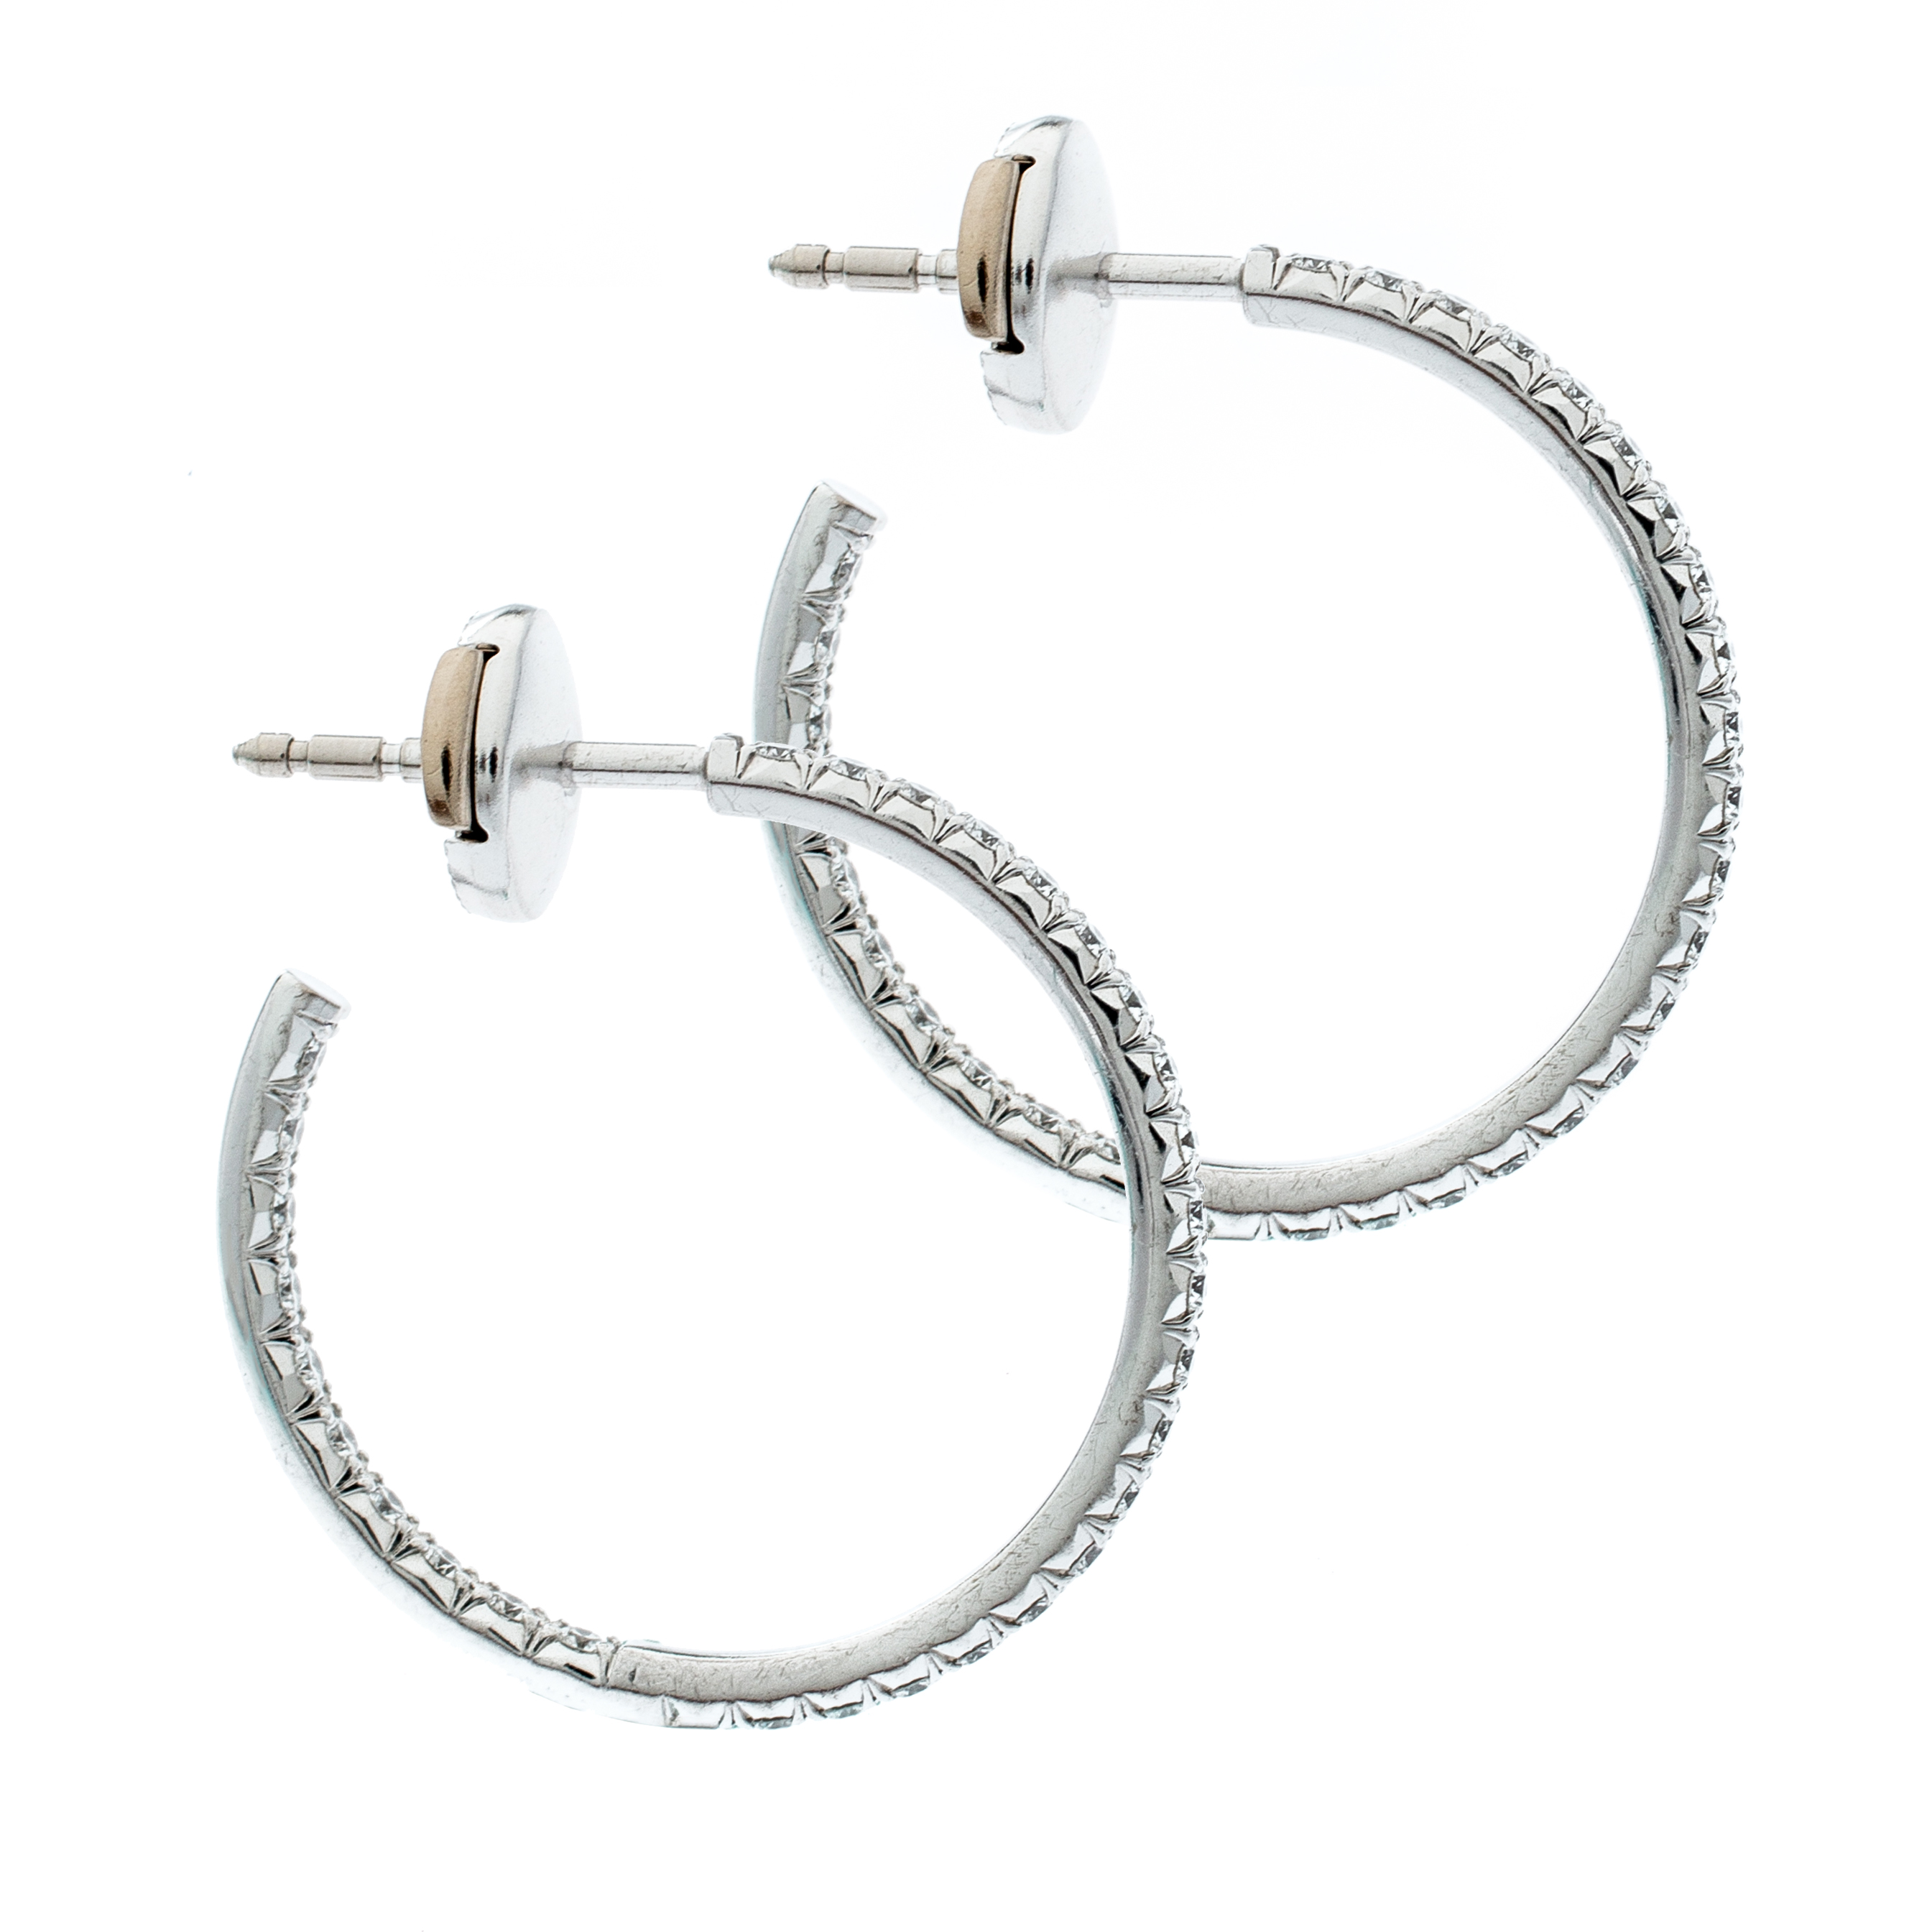 Tiffany and Co InsideOut Platinum and Diamond Hoop Earrings  Diamond  hoop earrings Diamond hoops Estate jewelry